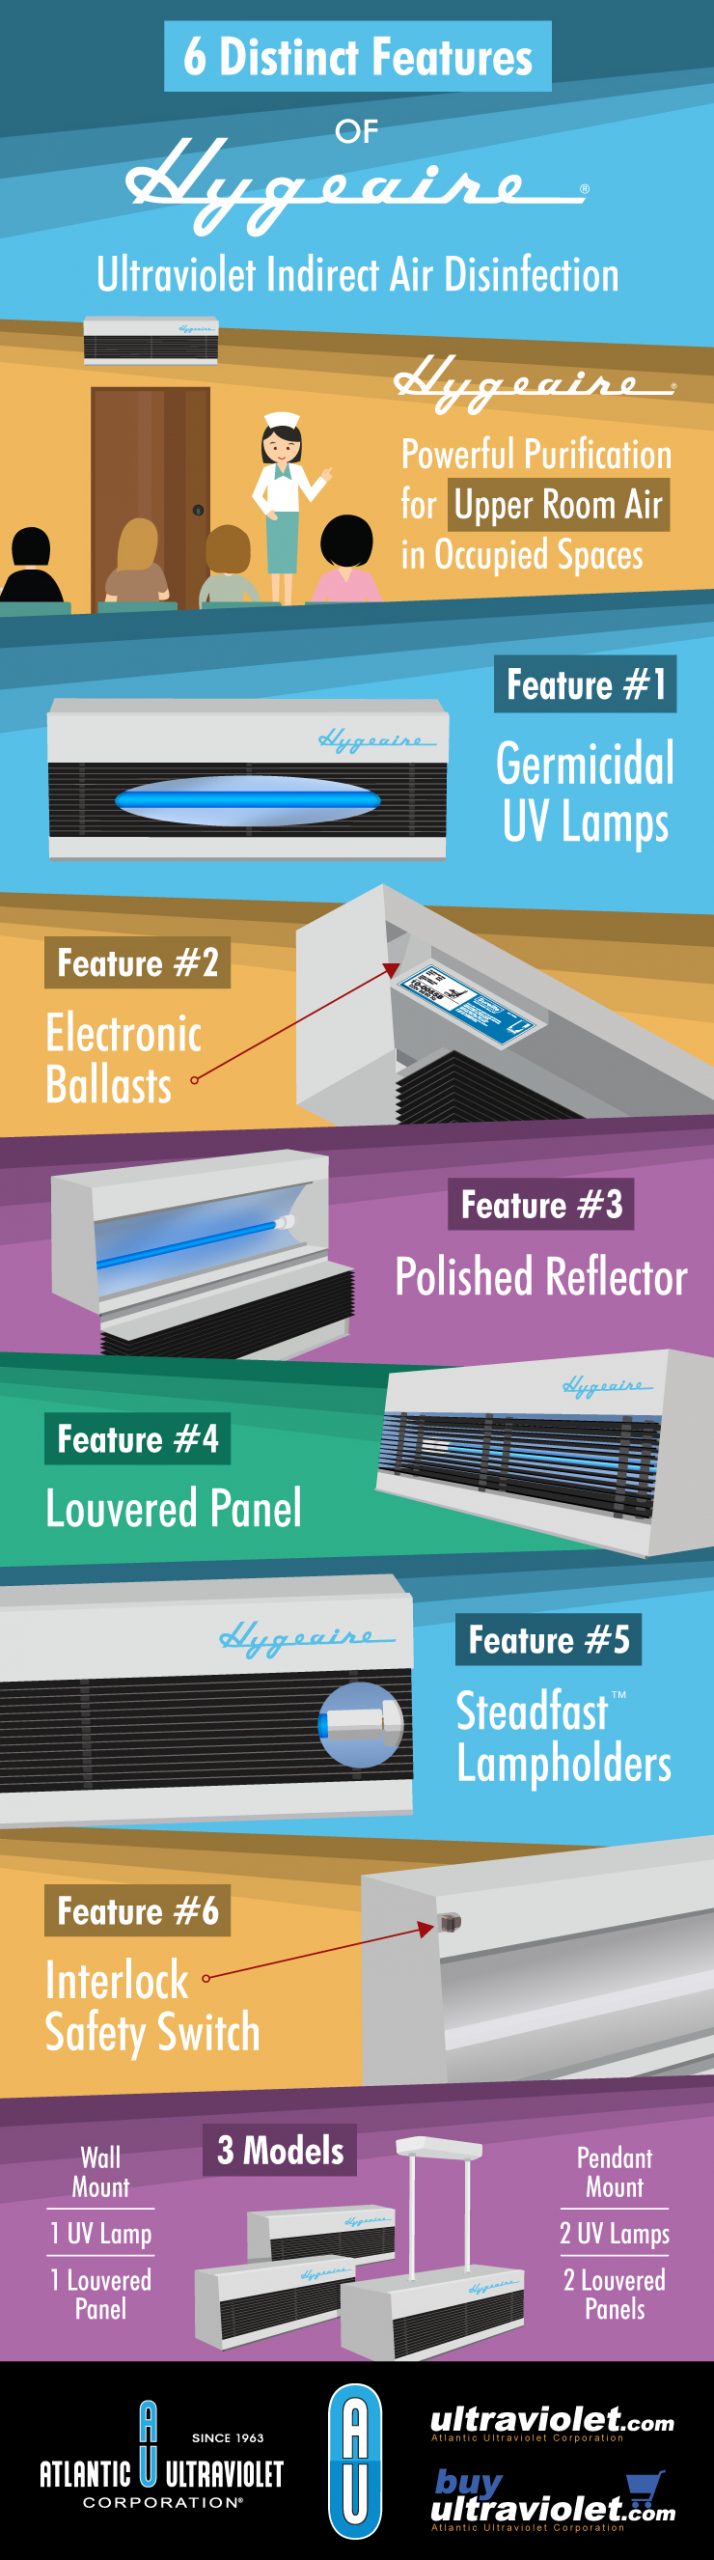 Infographic: 6 Distinct Features of Hygeaire Ultraviolet Indirect Air Disinfection